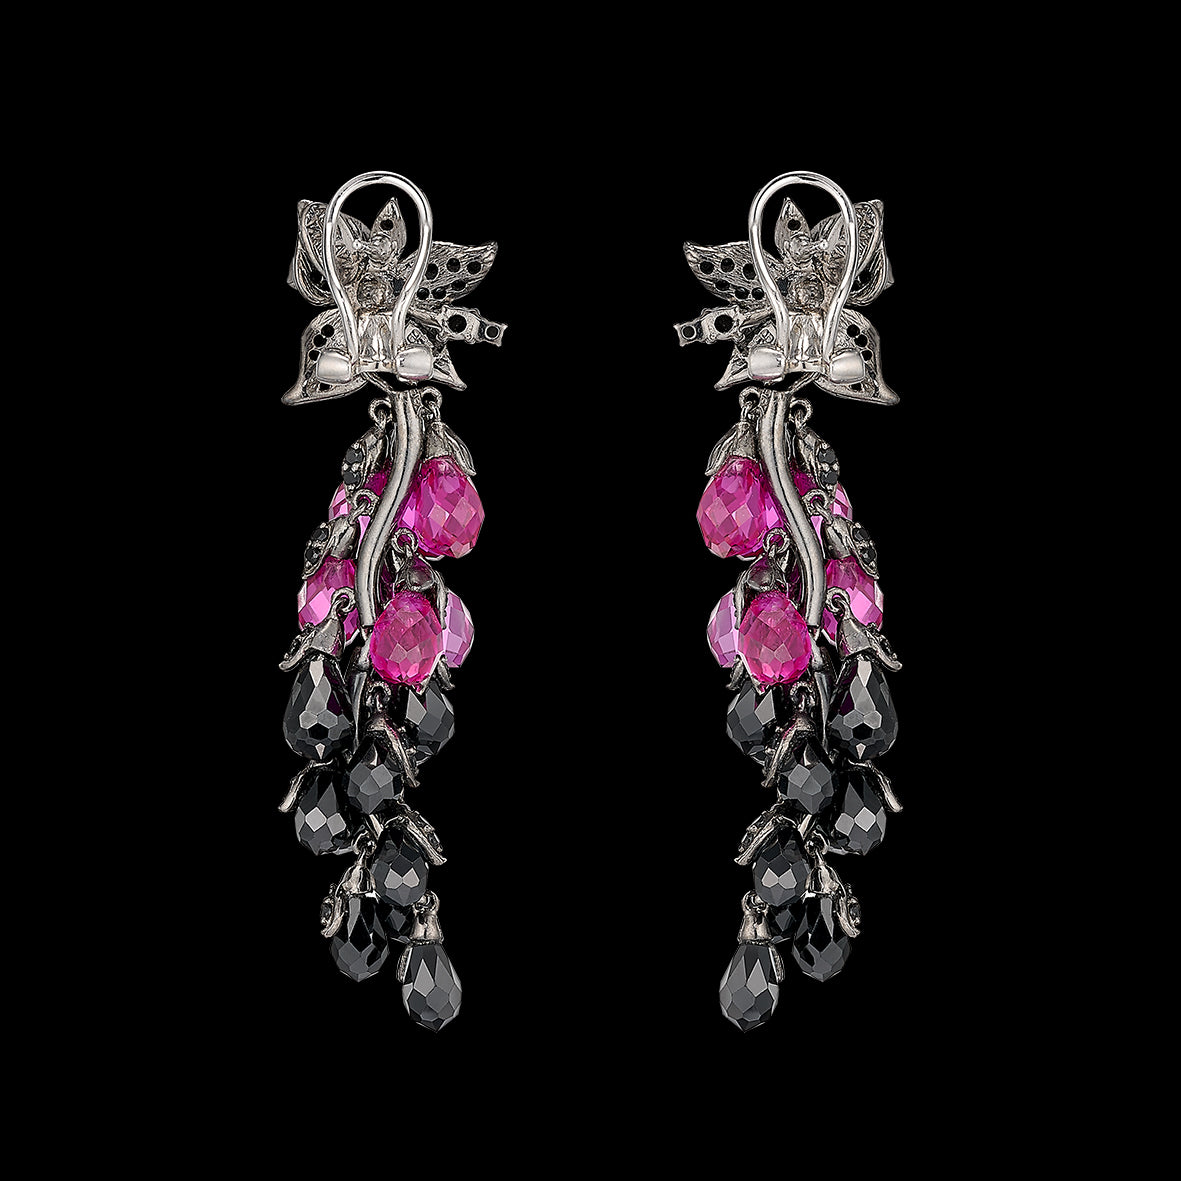 Black Diamond Fuchsia Coralbell Earrings, Earrings, Anabela Chan Joaillerie - Fine jewelry with laboratory grown and created gemstones hand-crafted in the United Kingdom. Anabela Chan Joaillerie is the first fine jewellery brand in the world to champion laboratory-grown and created gemstones with high jewellery design, artisanal craftsmanship and a focus on ethical and sustainable innovations.